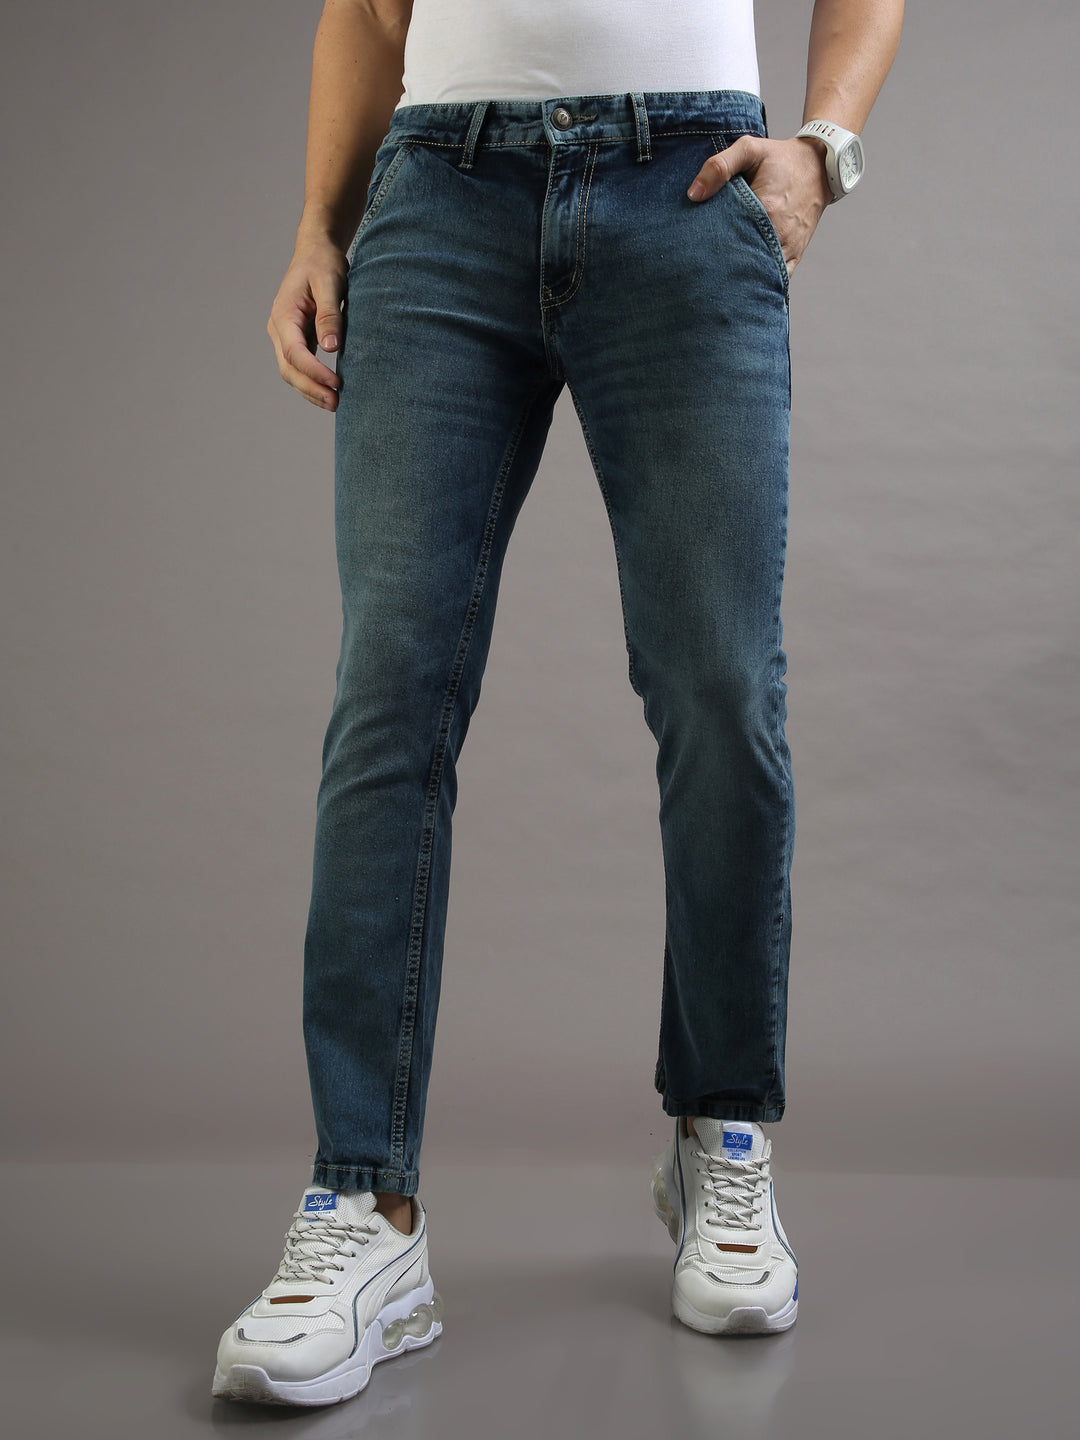 Nautical Tapered Blue Jeans